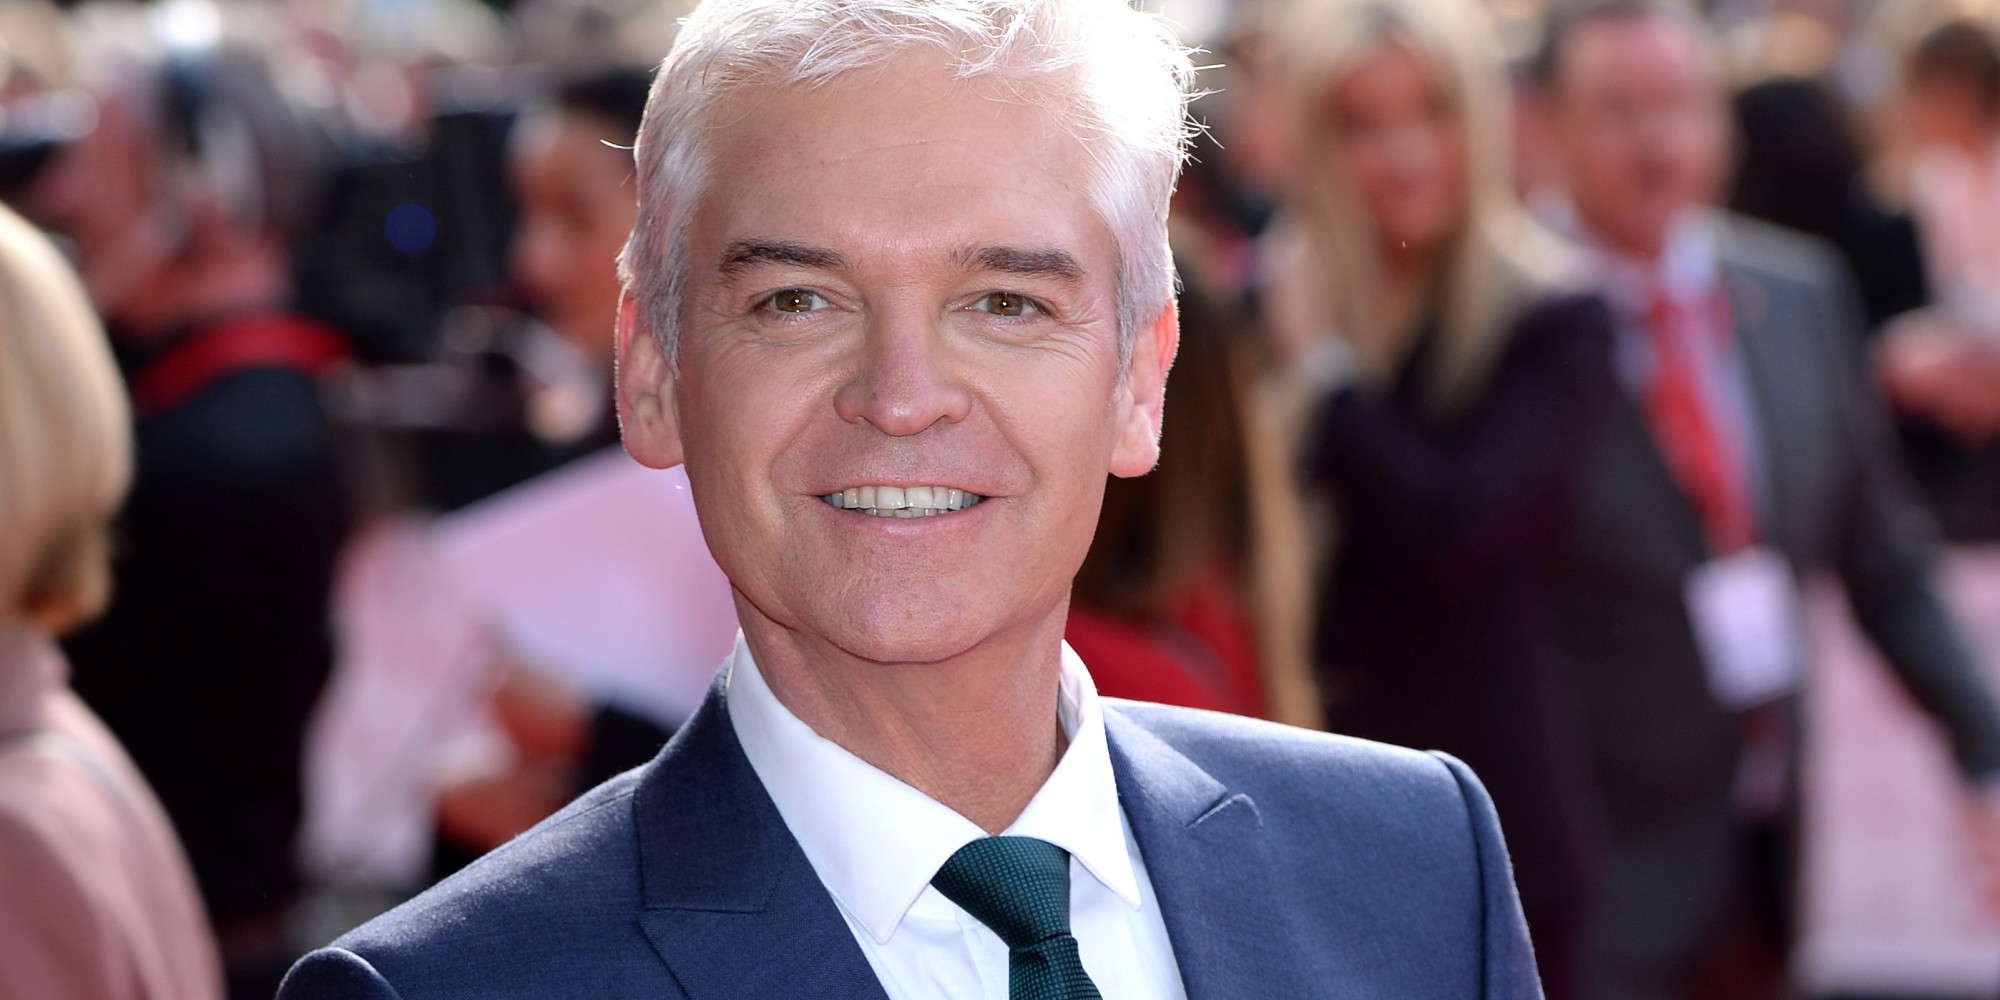 Phillip Schofield To Broadcast Live On ITV For 24 Hours For 'Text Santa' | HuffPost UK2000 x 1000